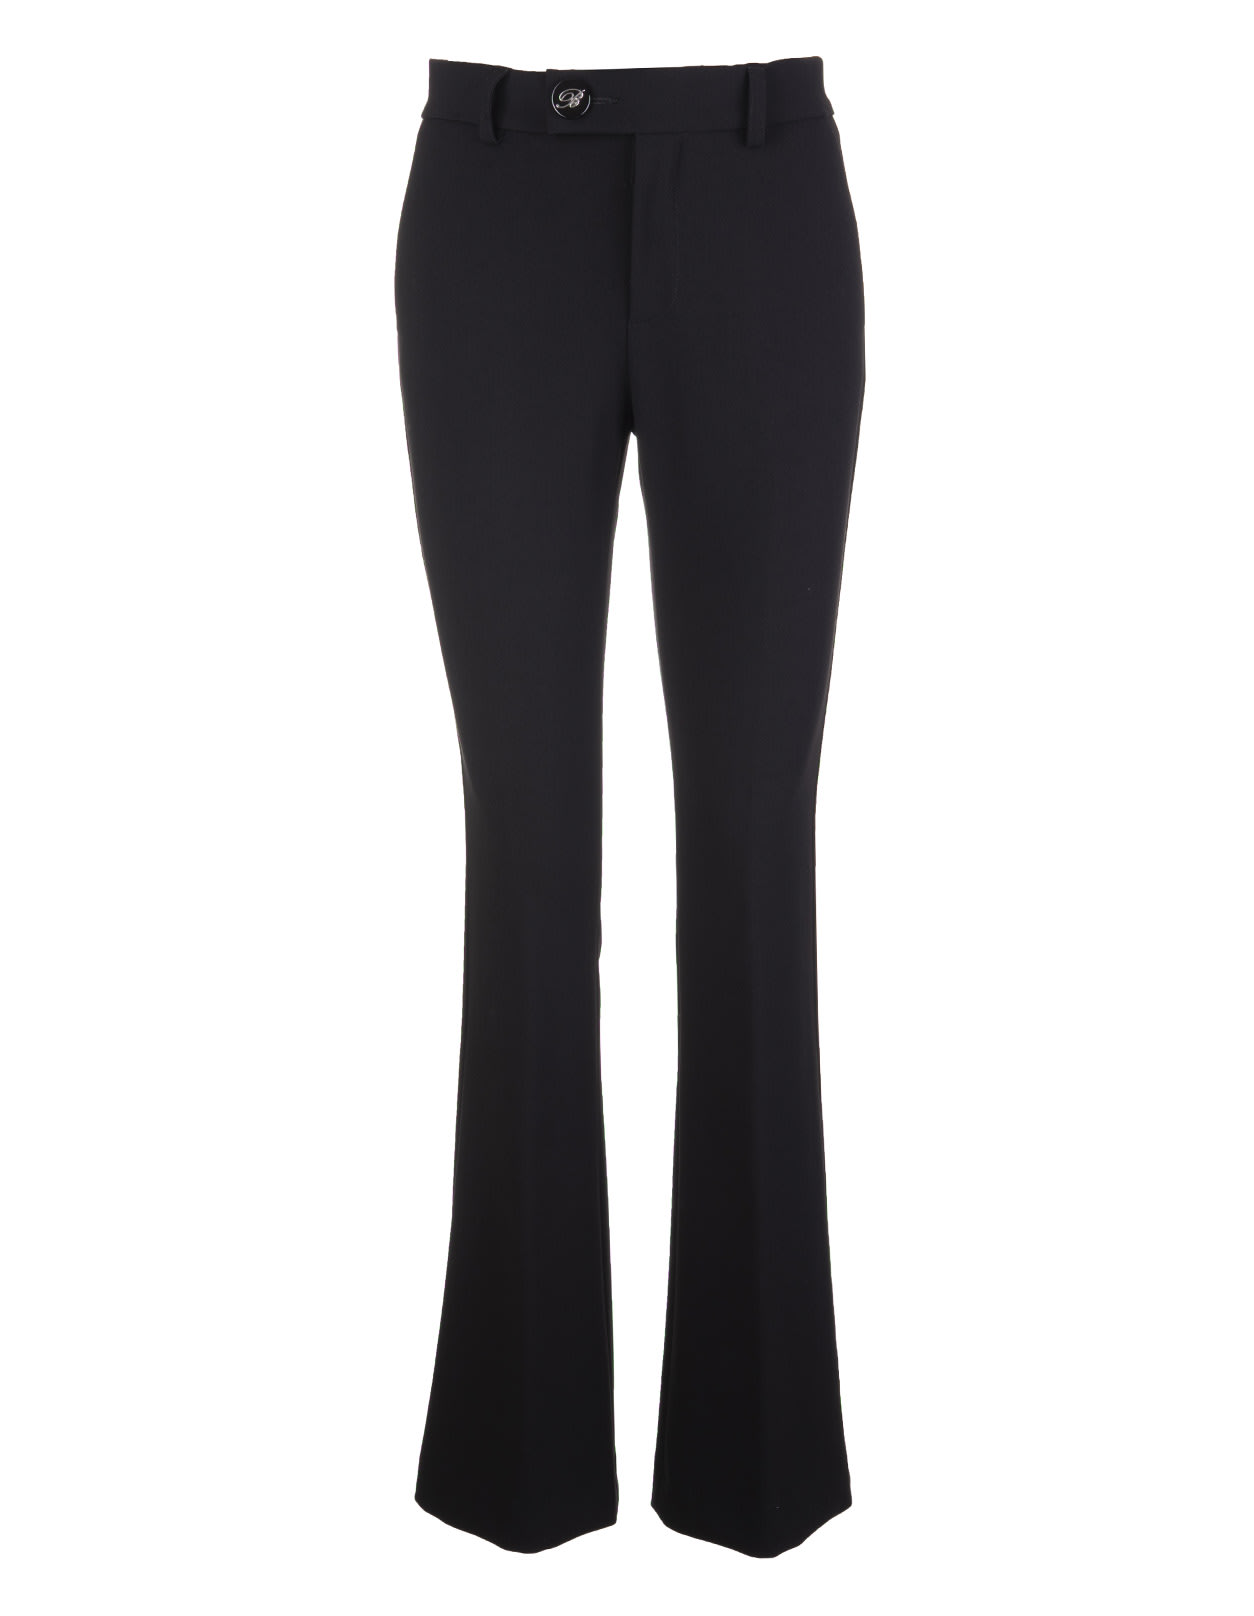 Blumarine Black Flared Trousers With Jewel Button